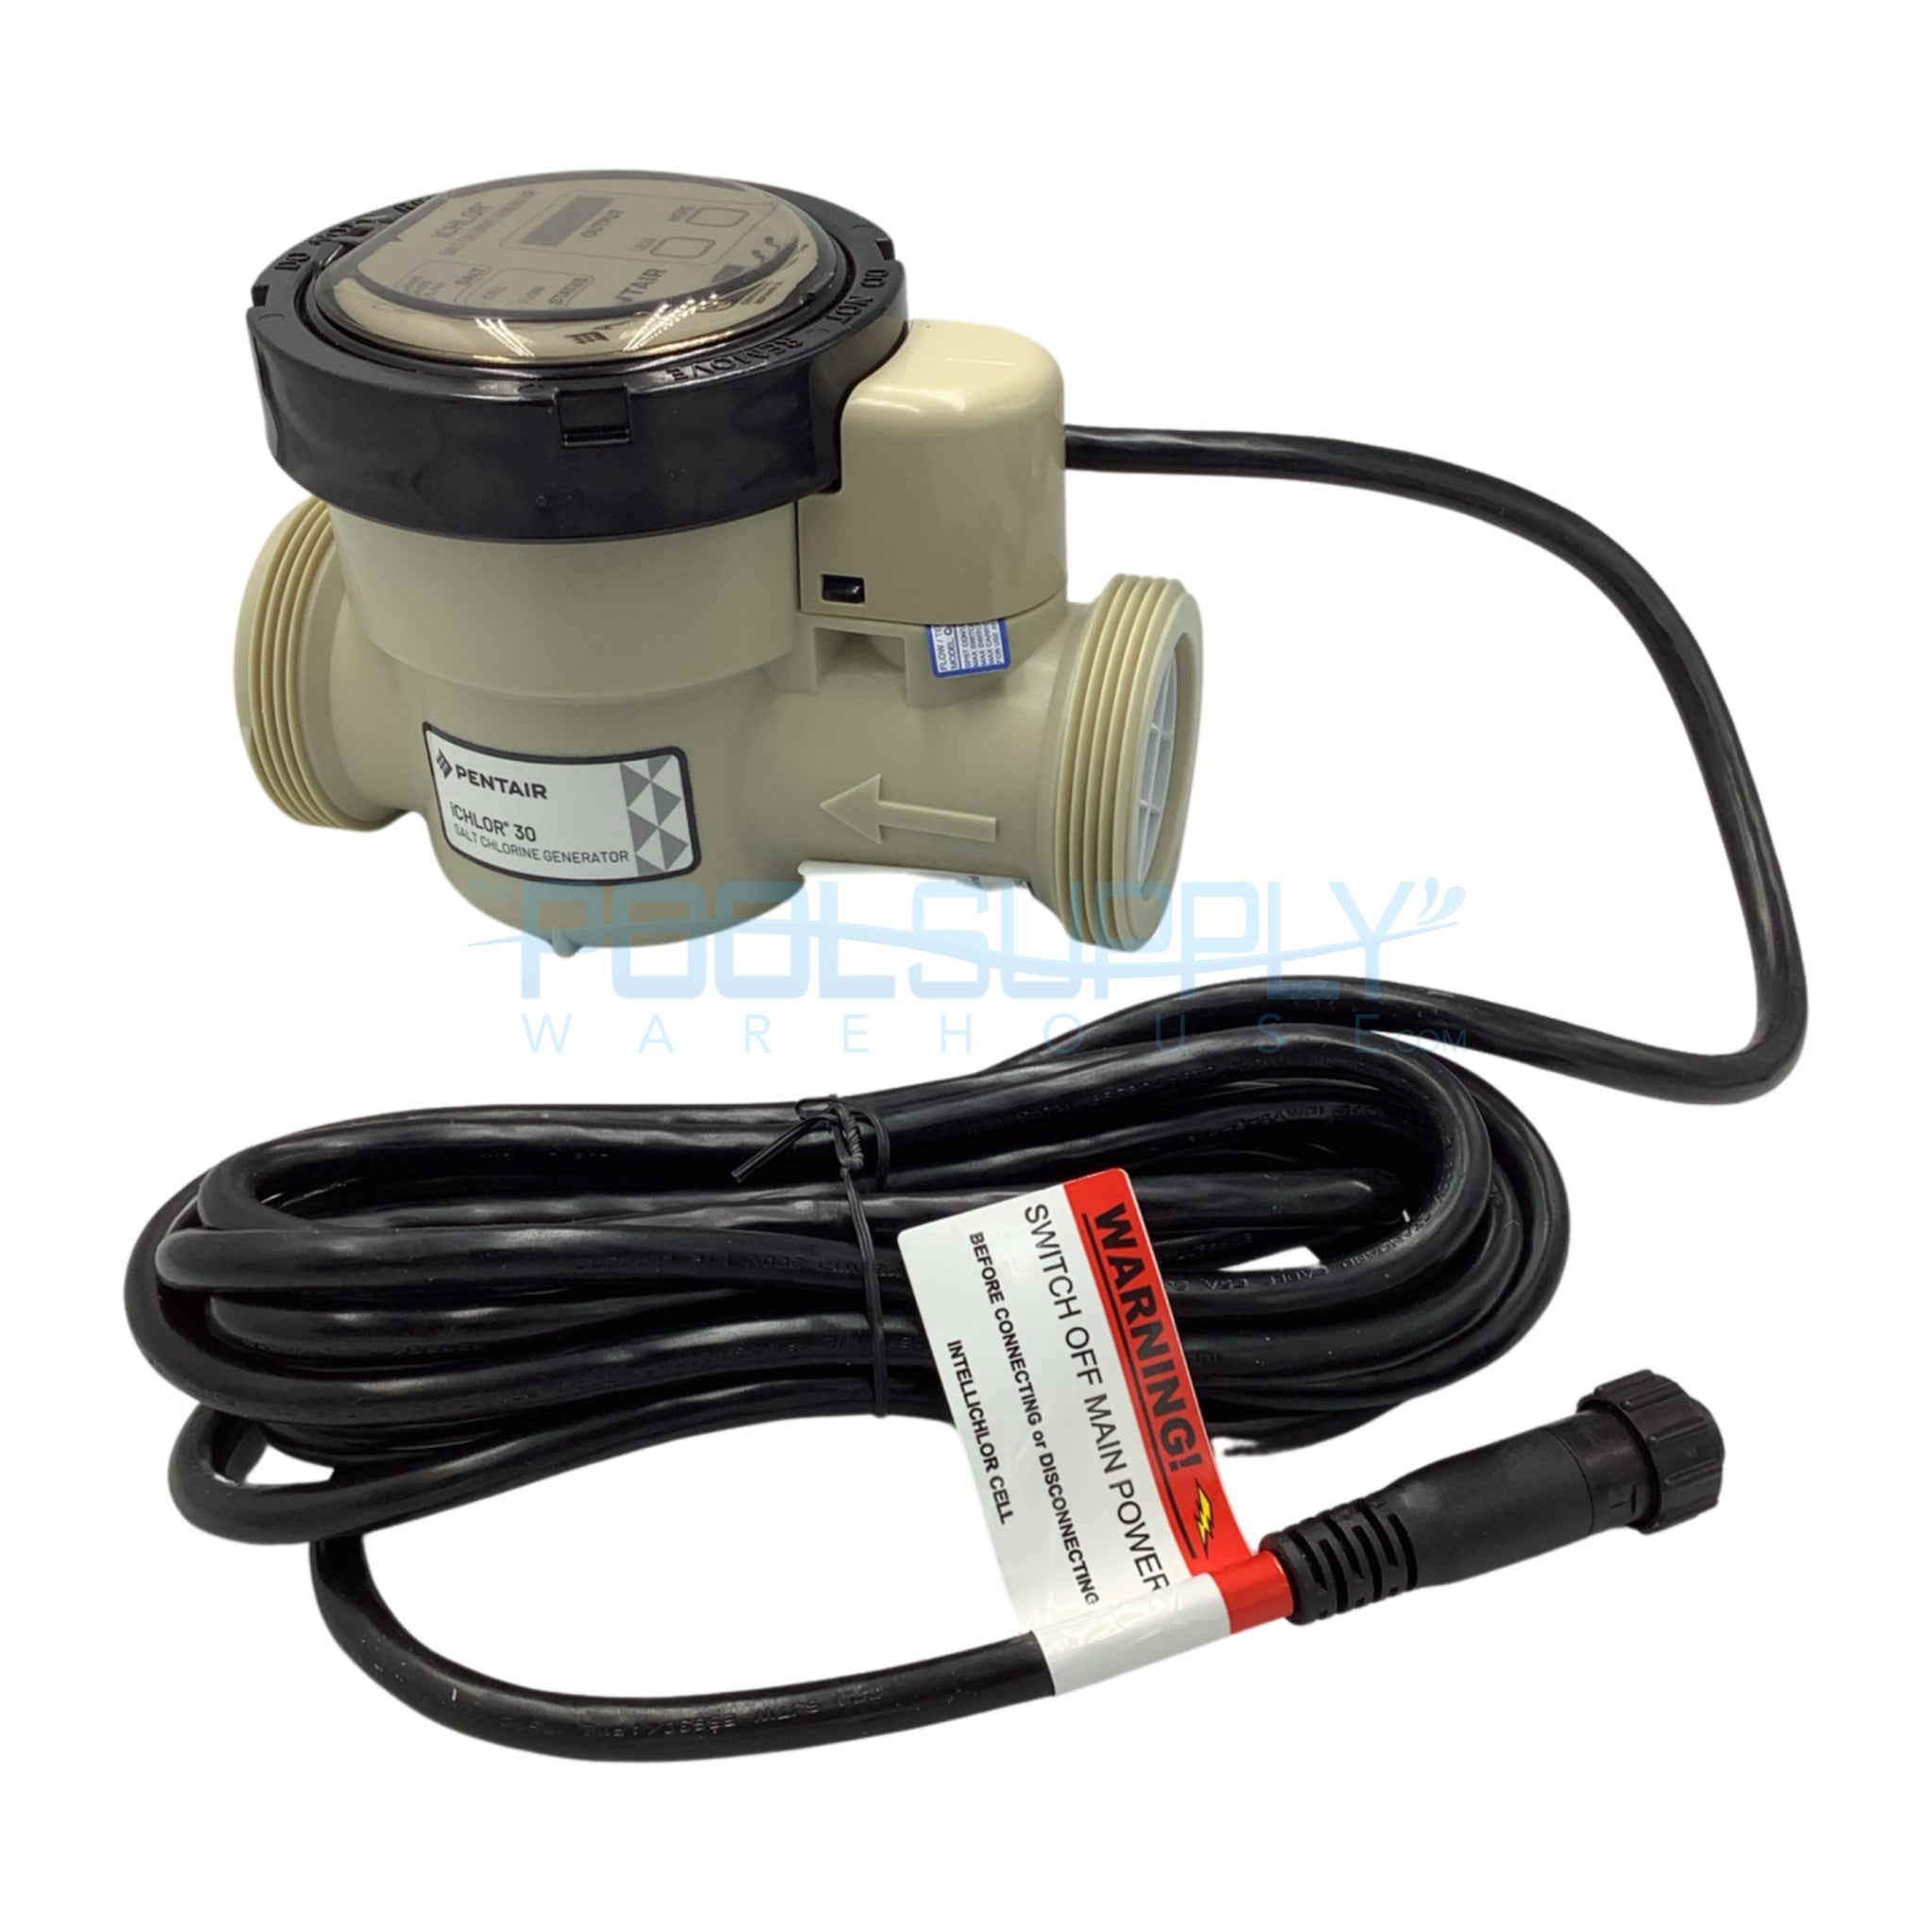 🔥🔥🔥CONTACT US TO GET A BETTER PRICE – ORIGINAL OEM Pentair IntelliChlor  Salt Water Generator Complete System IC40 Cell & Power Center Kit